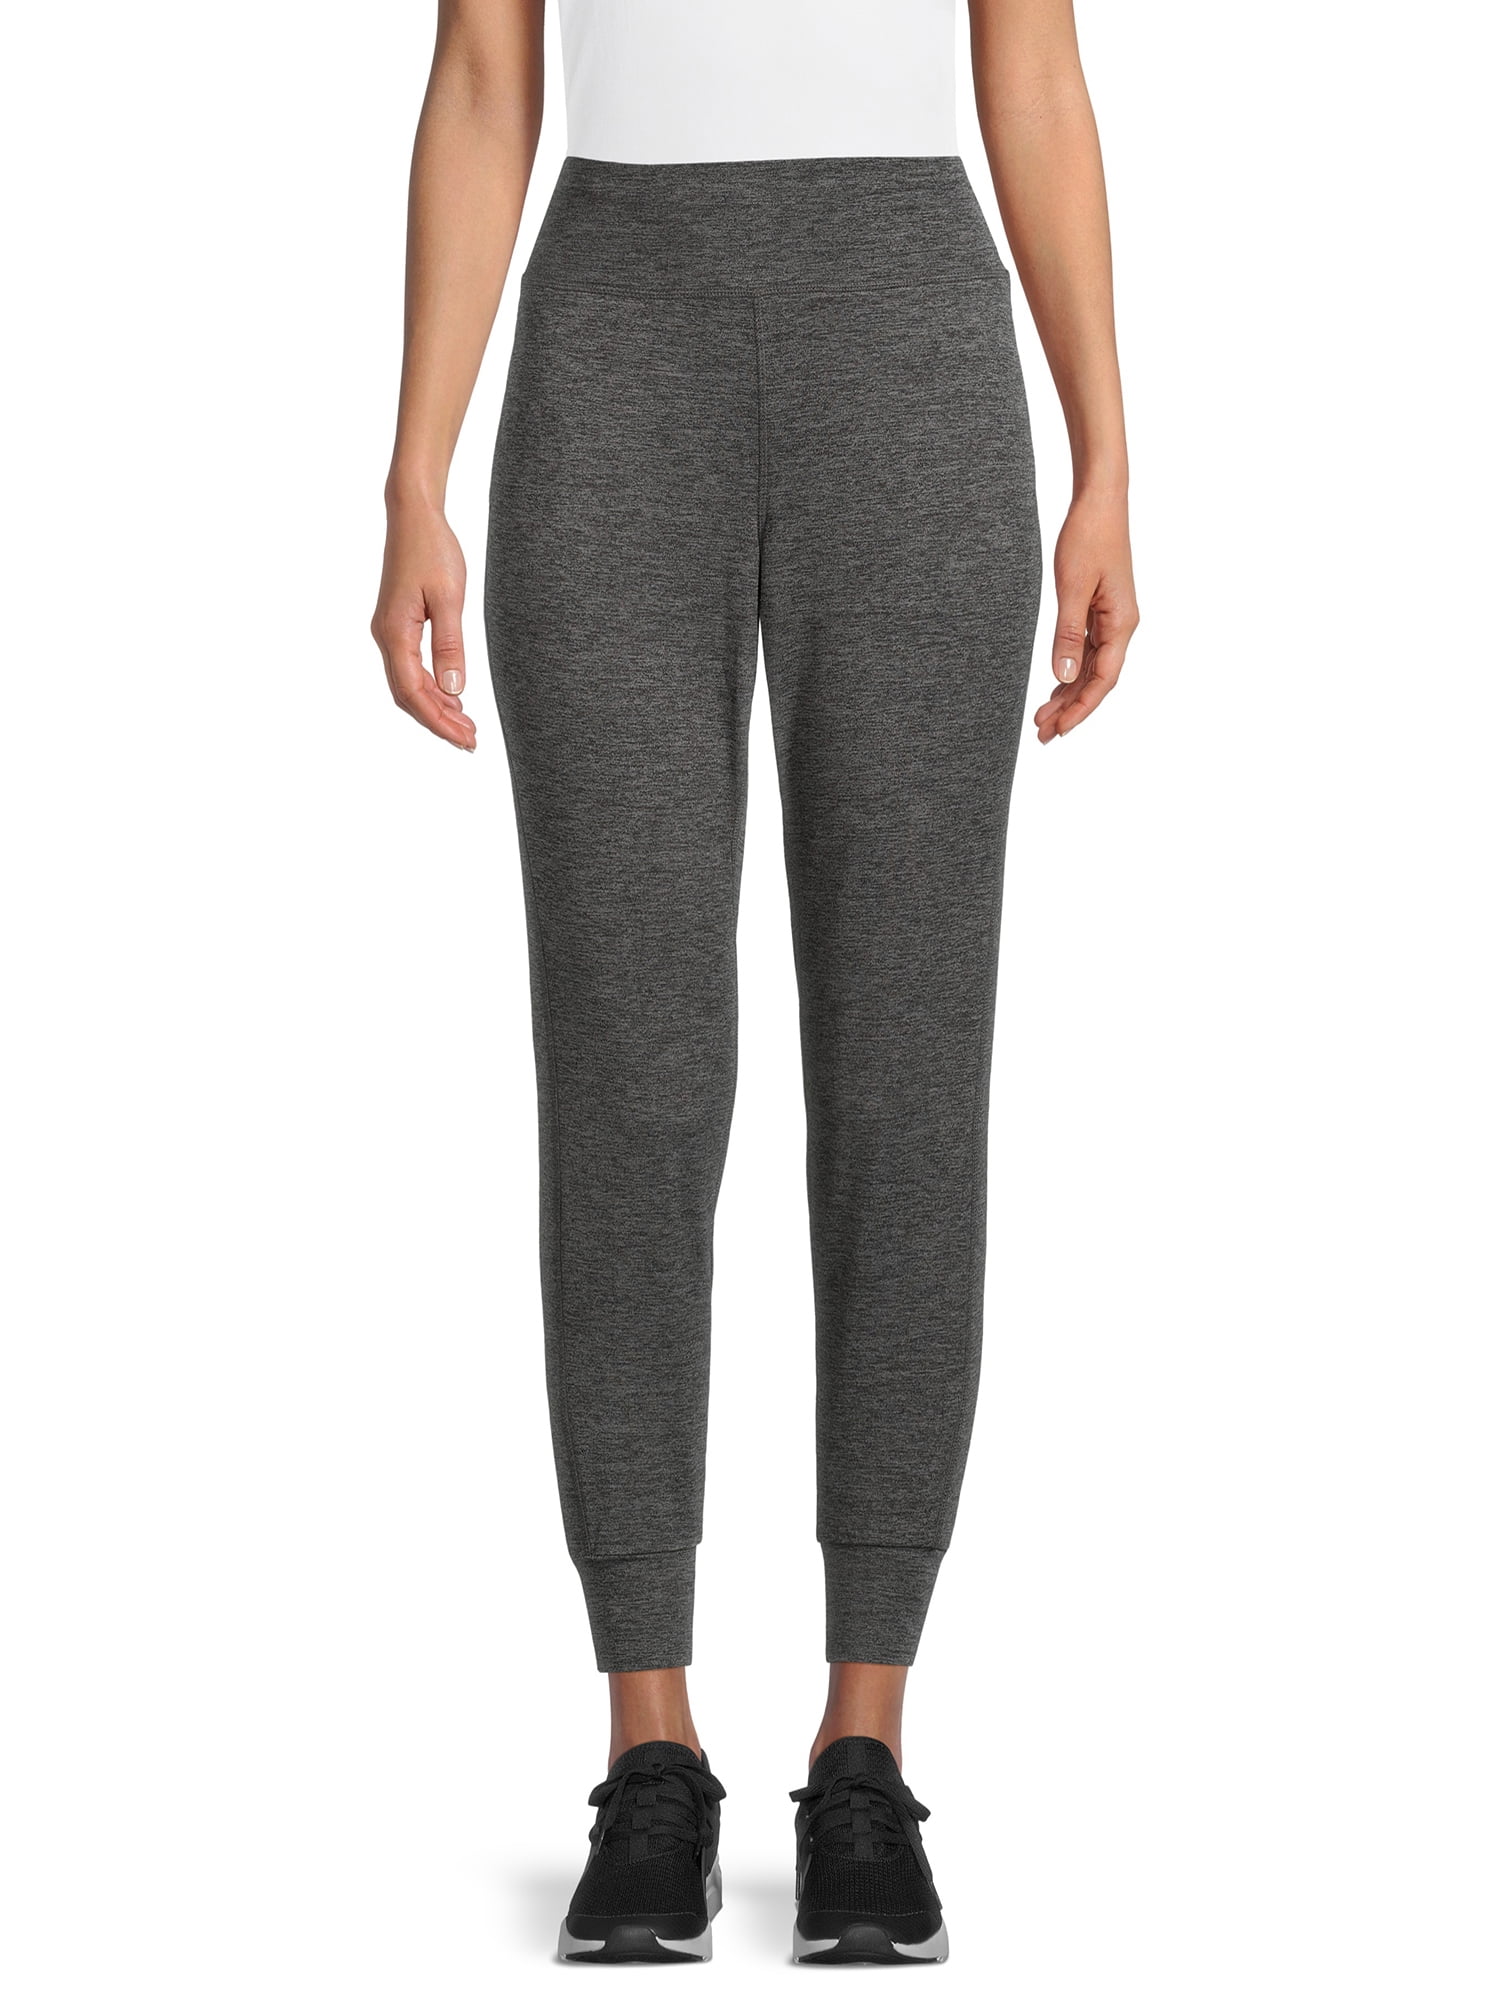 Athletic Works Women's Super Soft Lightweight Jogger Pant with